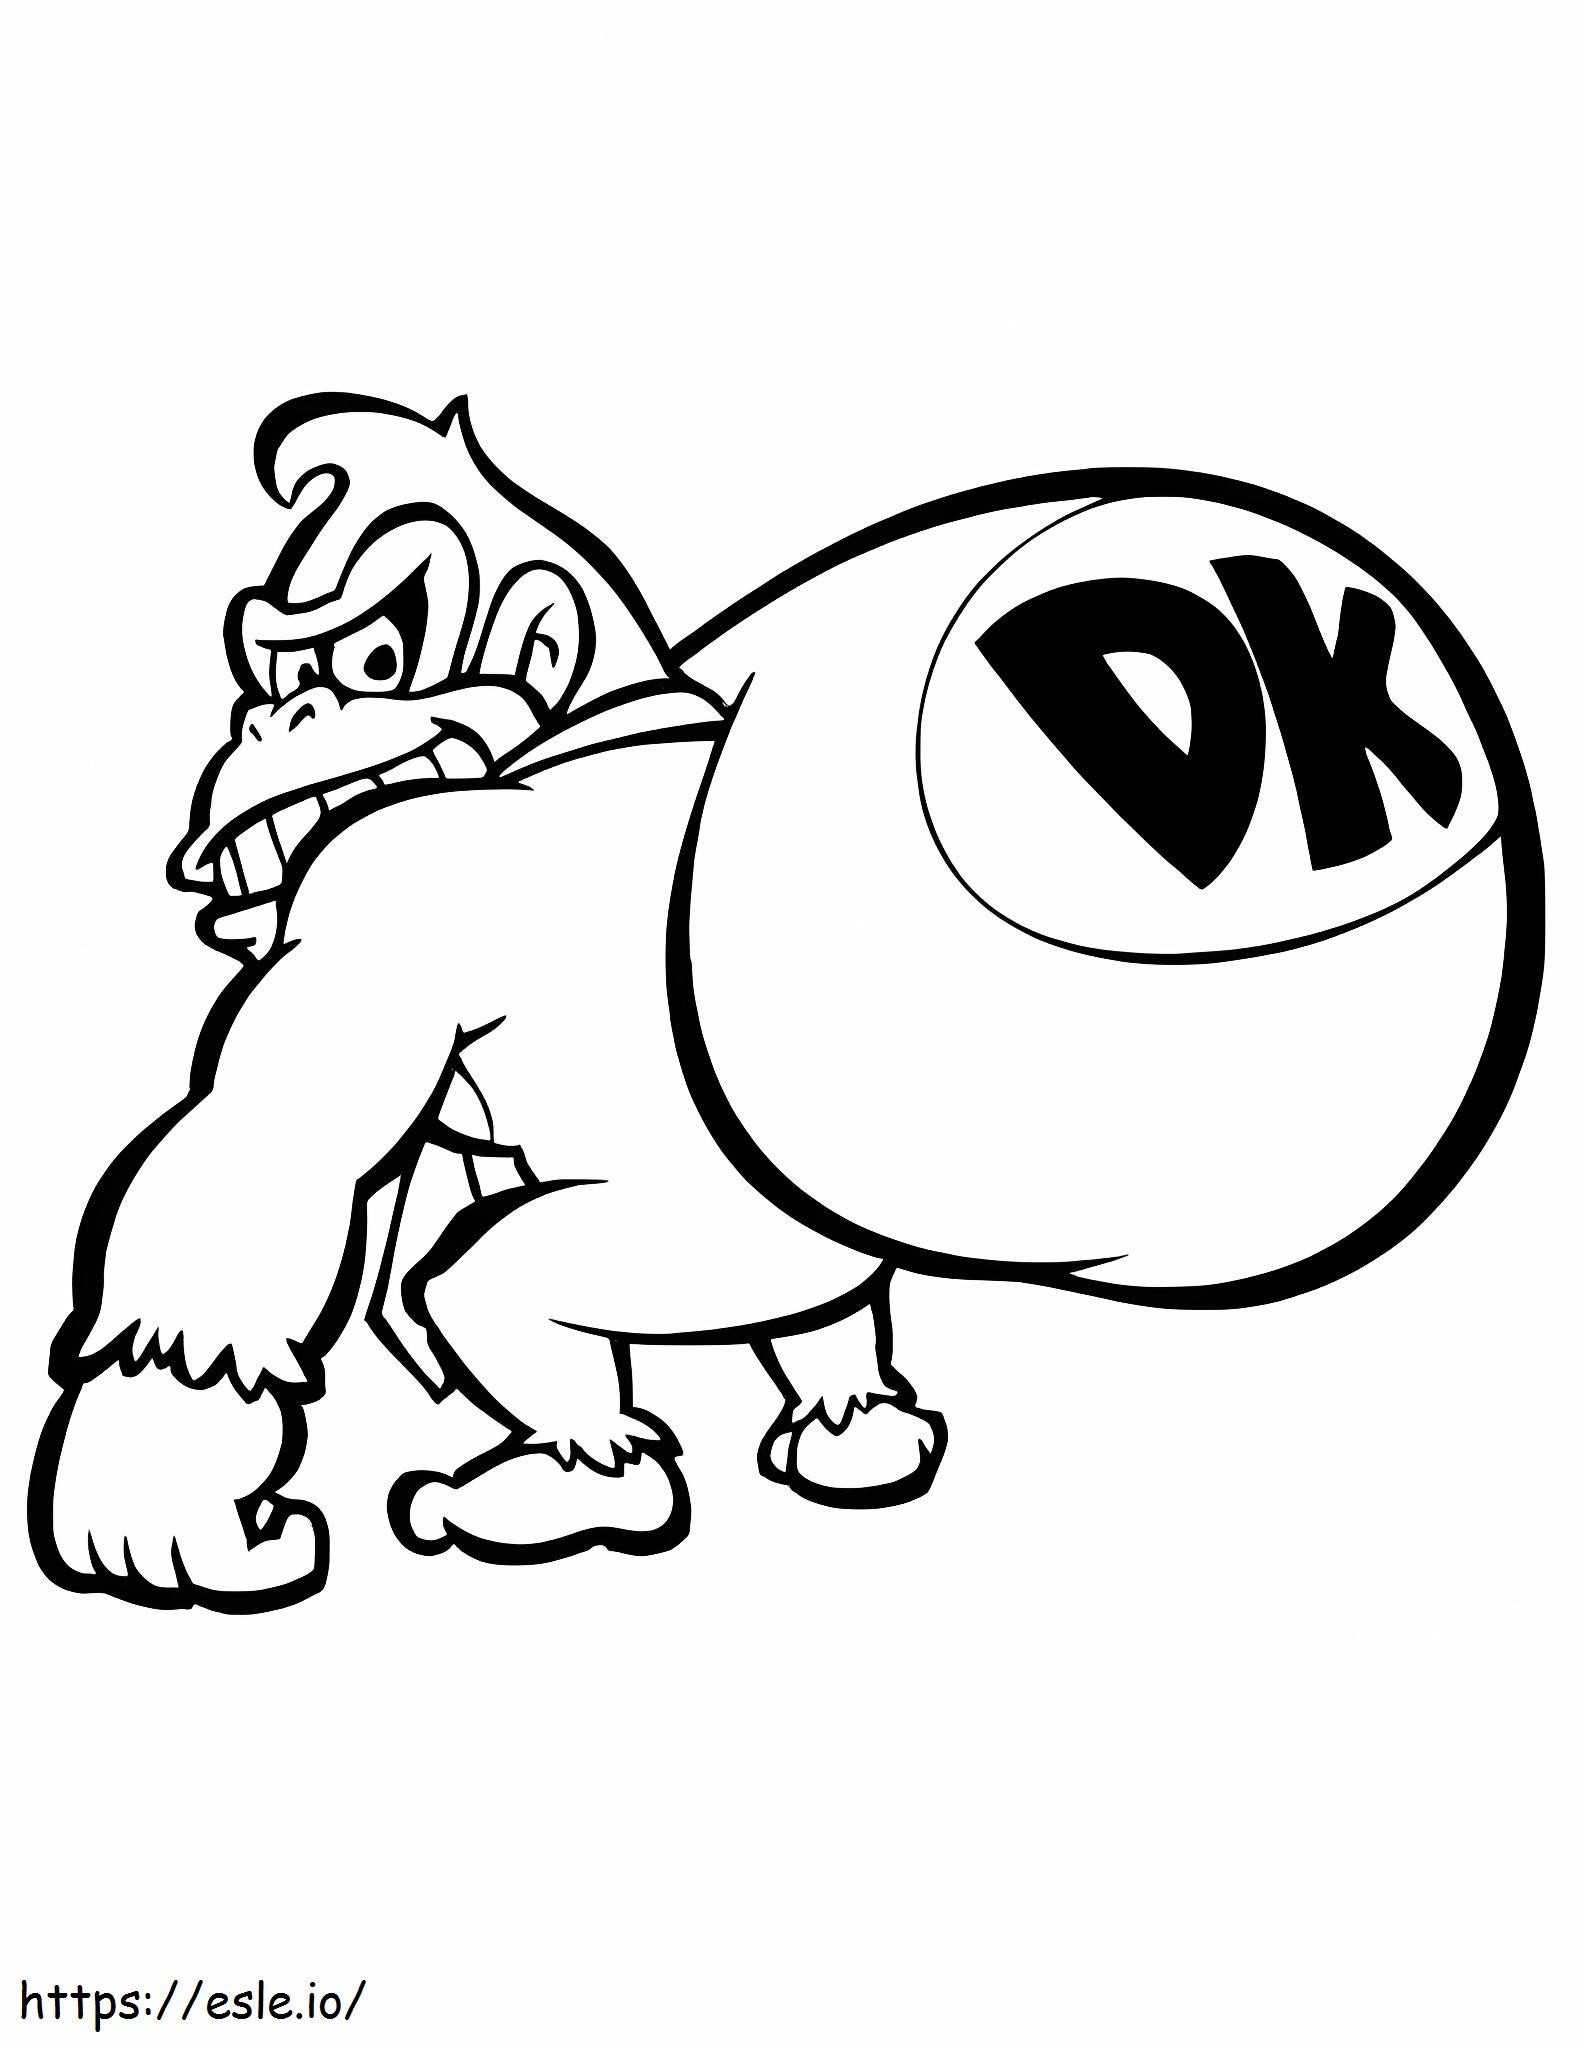 Simple Donkey Kong coloring page